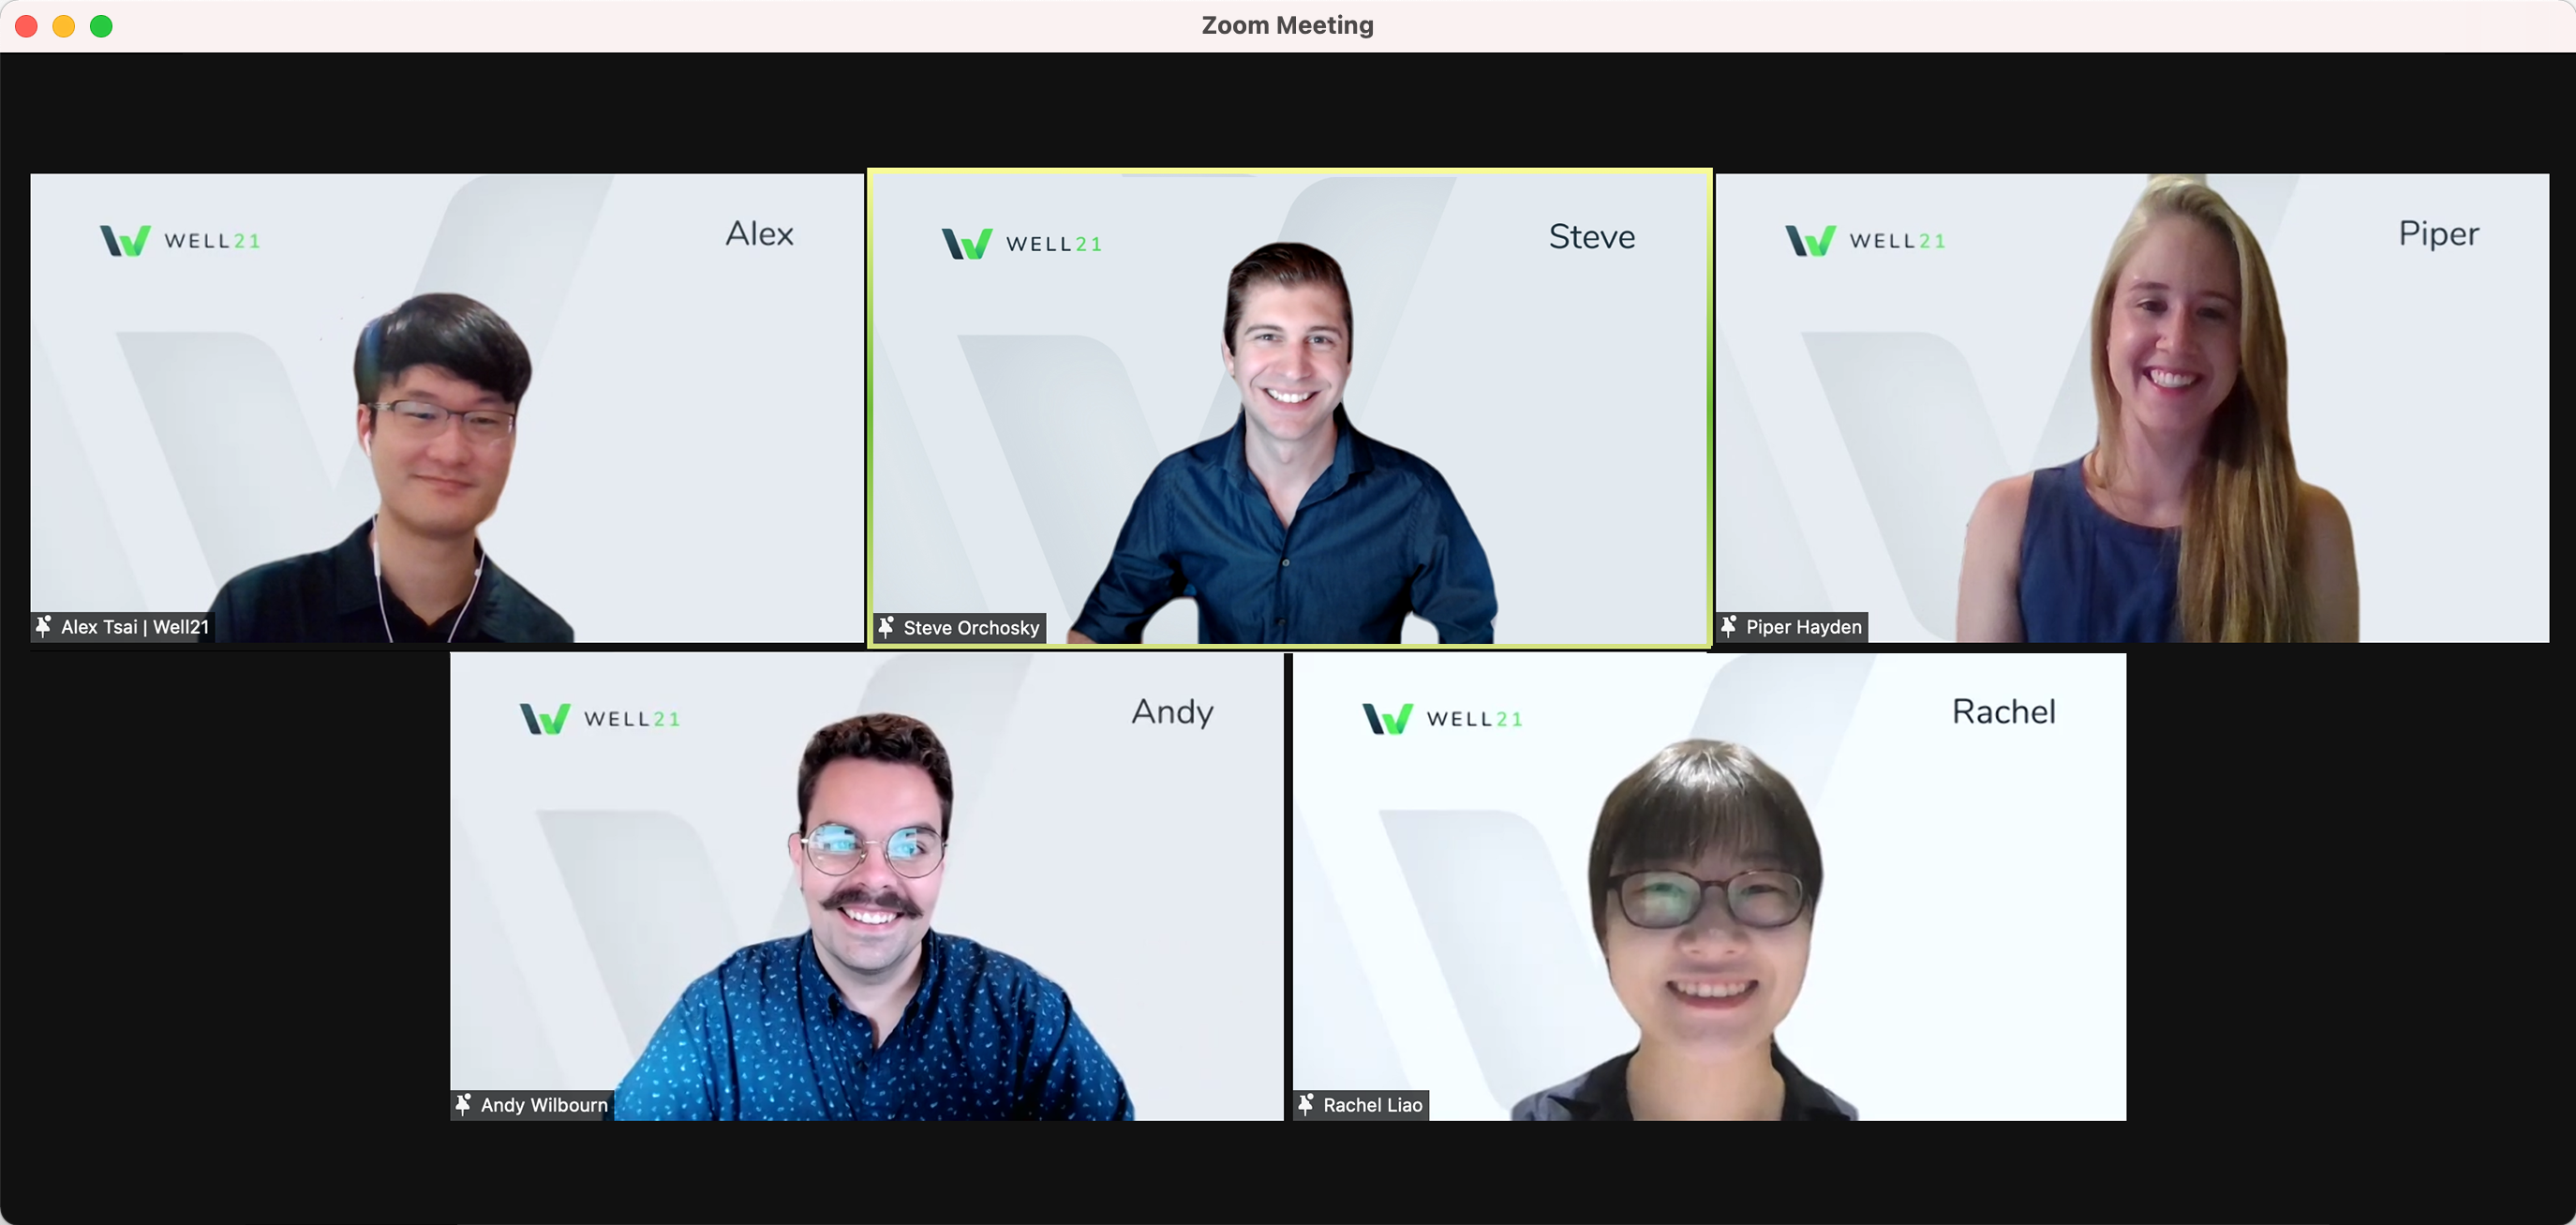 Virtual team photo of 5 students on Zoom